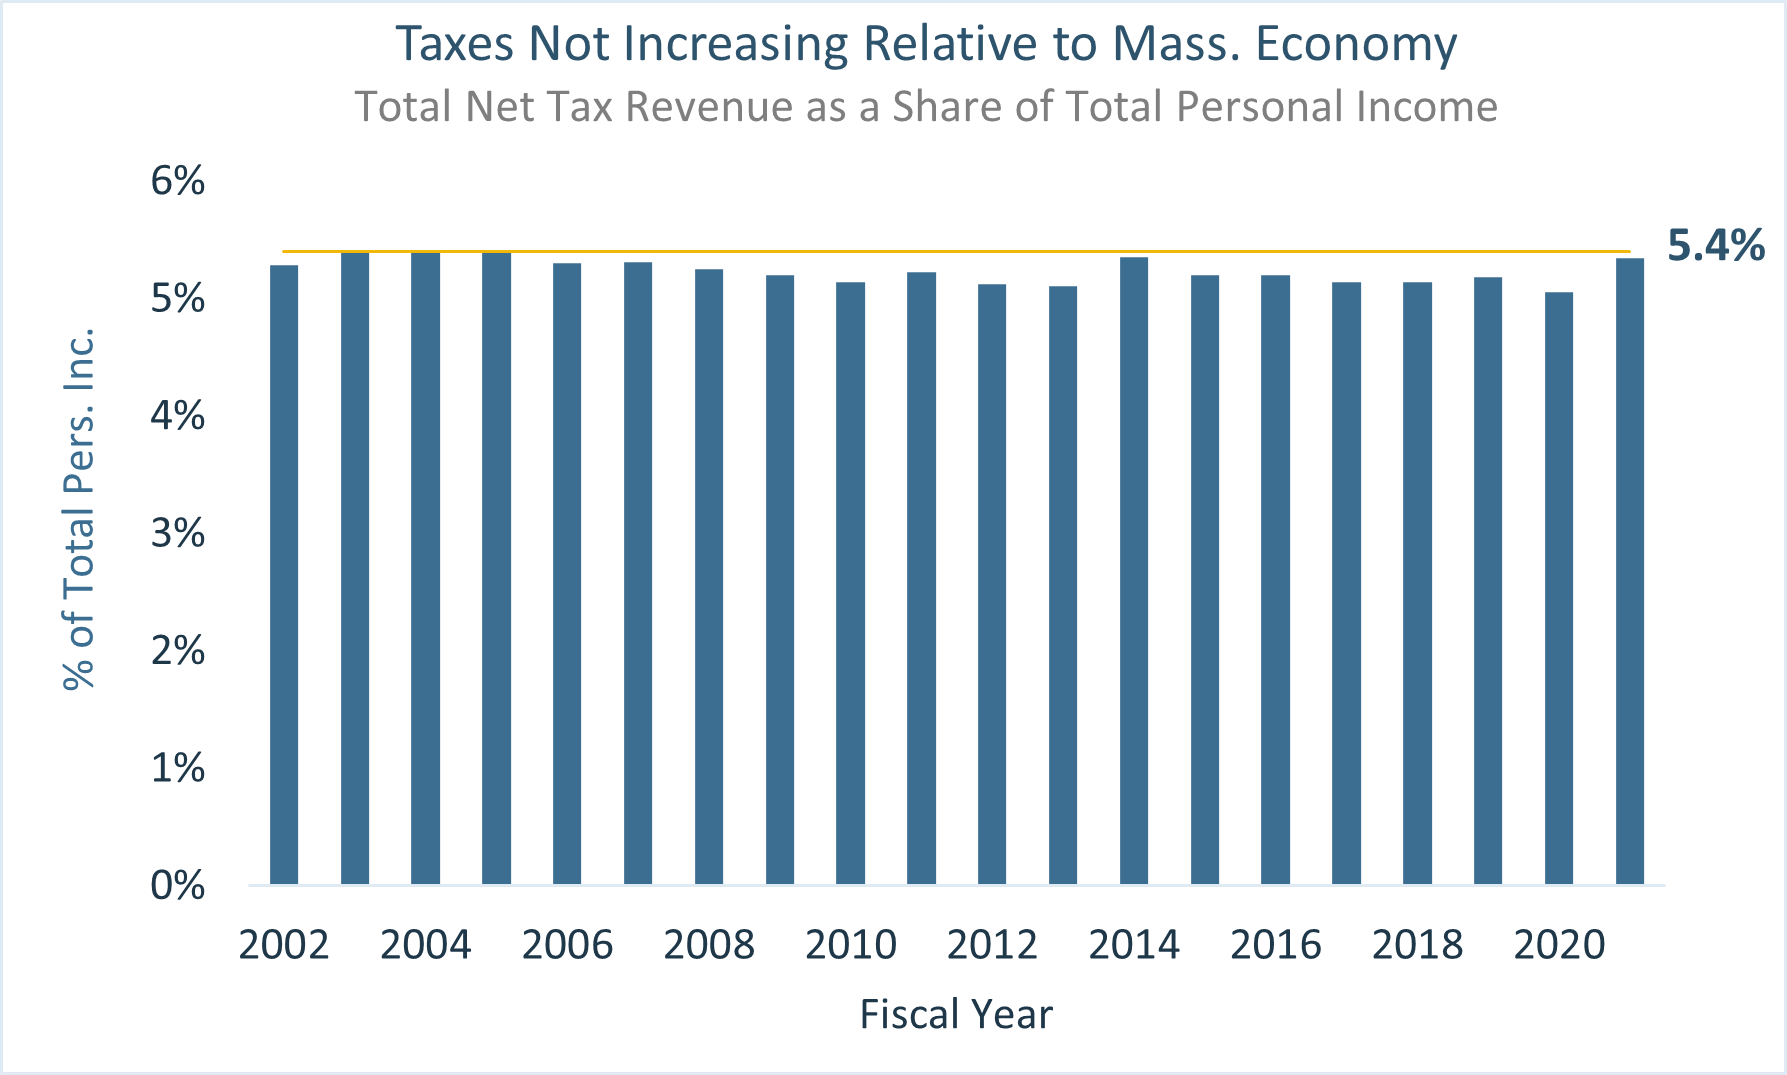 Chart: Taxes Not Increasing Relative to Mass. Economy - Total Net Tax Revenue as a Share of Total Personal Income